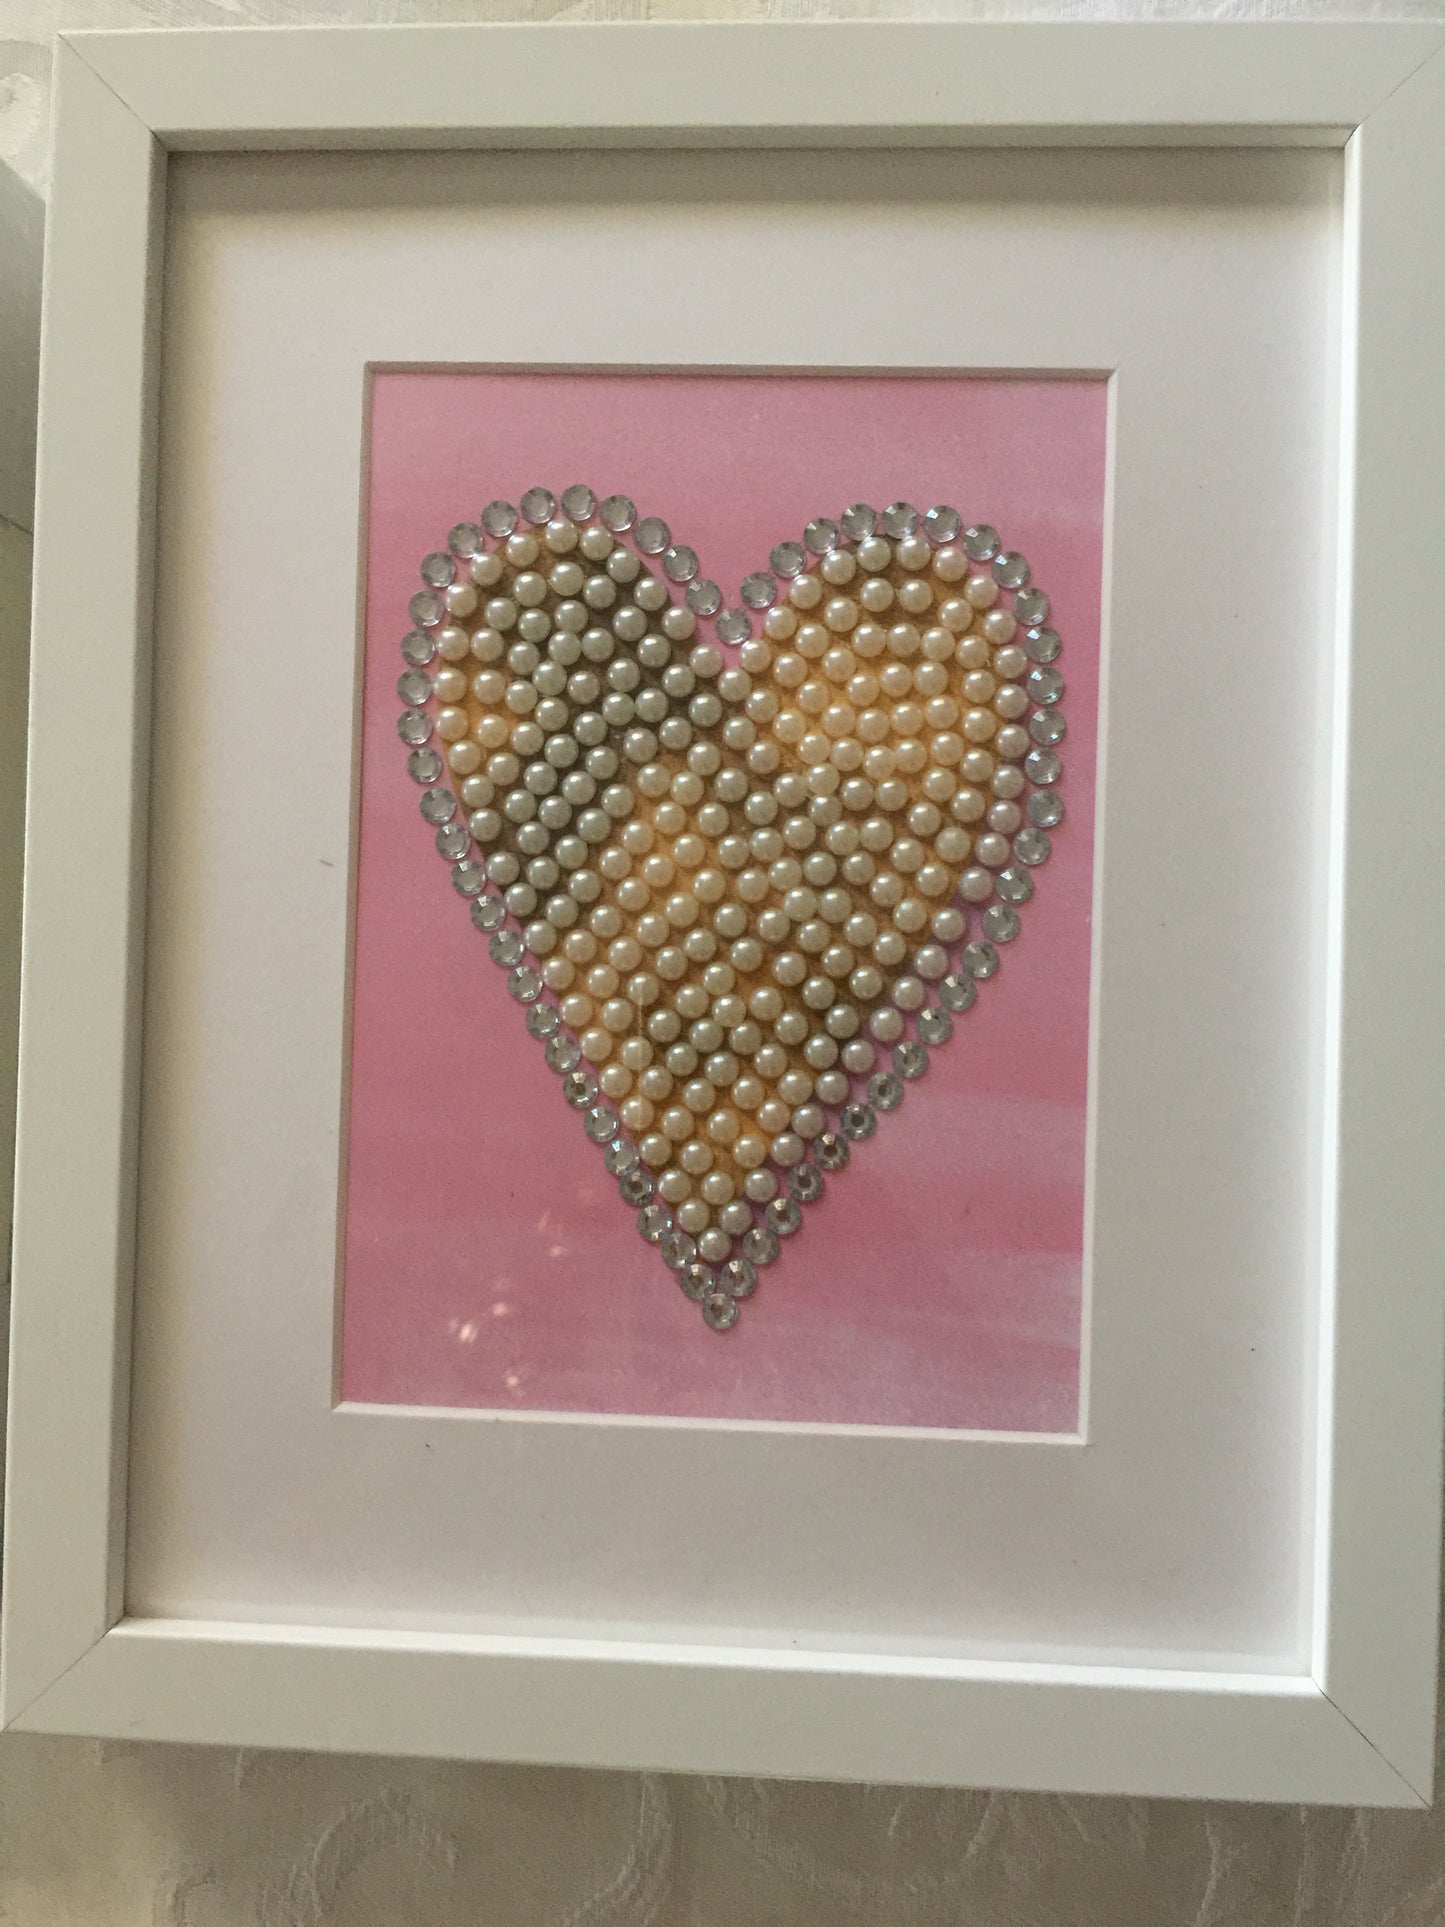 Framed “pearls and diamonds in love”heart 5x7 pink background